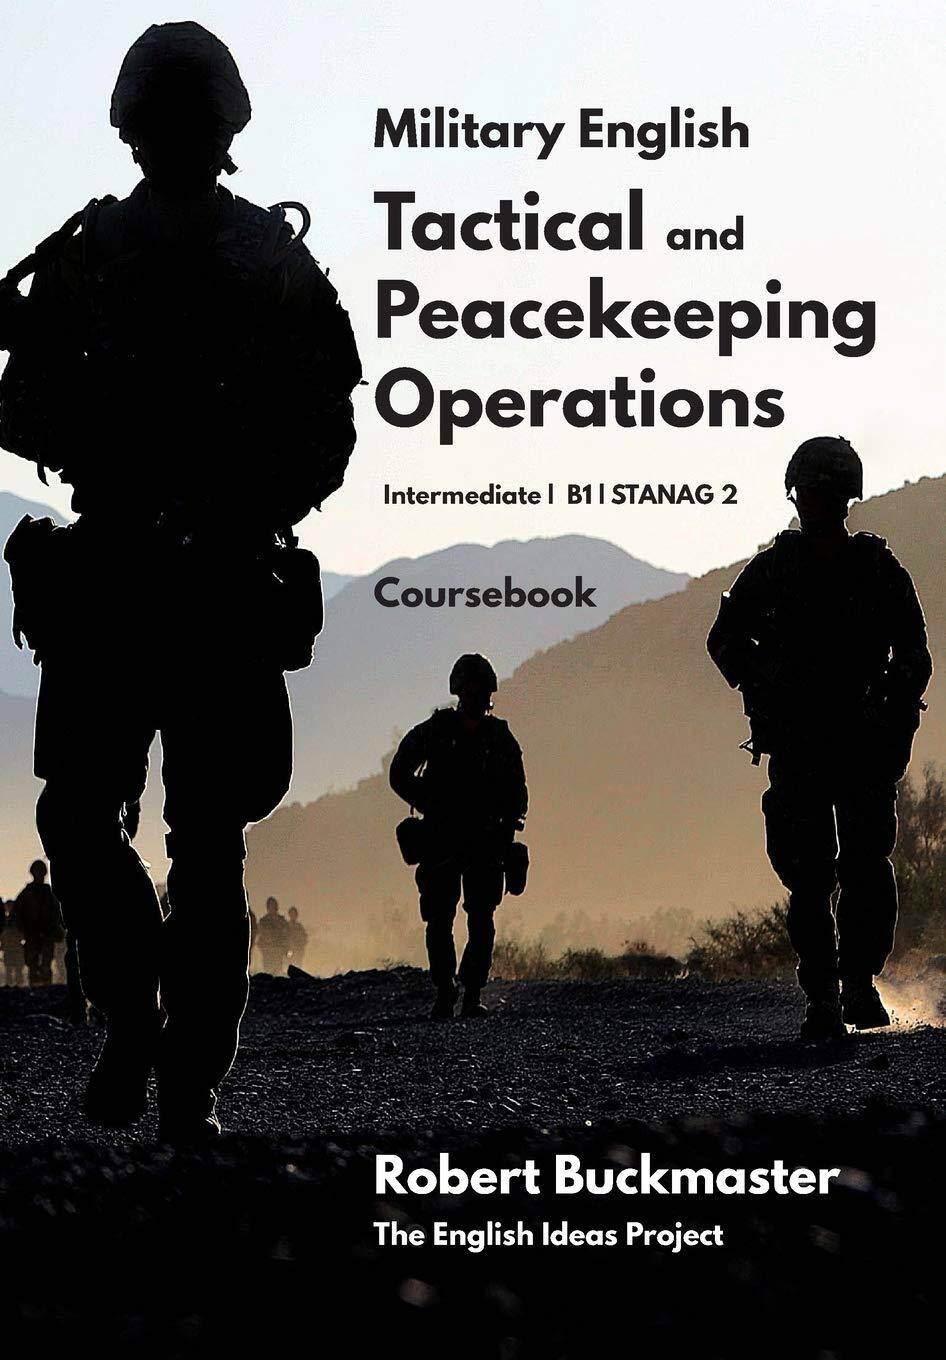 Military English Tactical and Peacekeeping Operations : Coursebook : 1